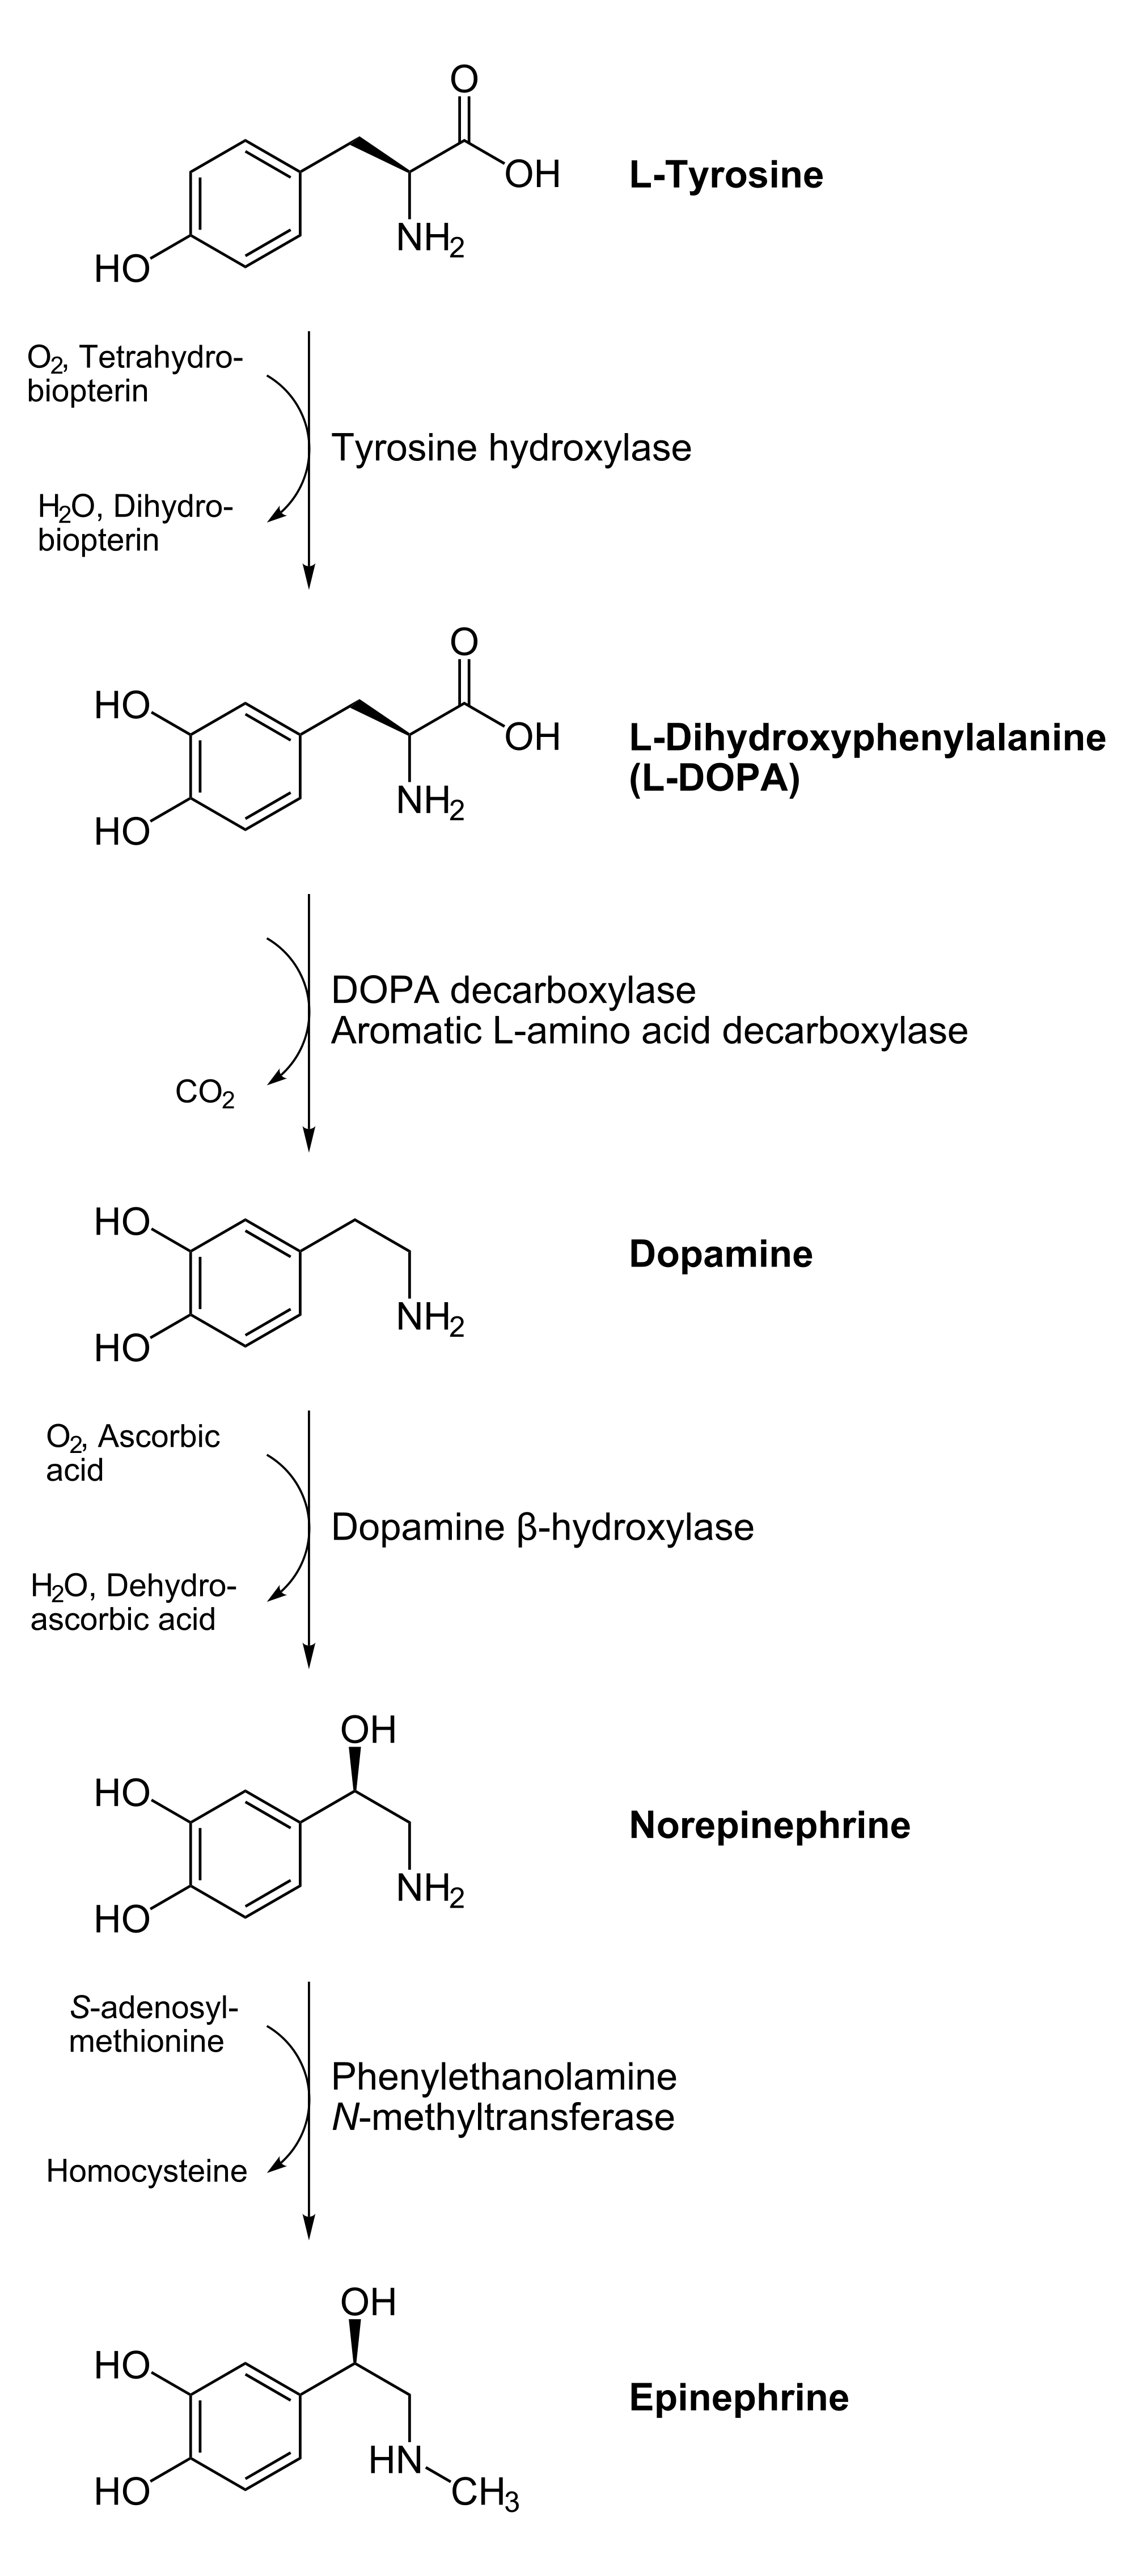 Catecholamine synthesis